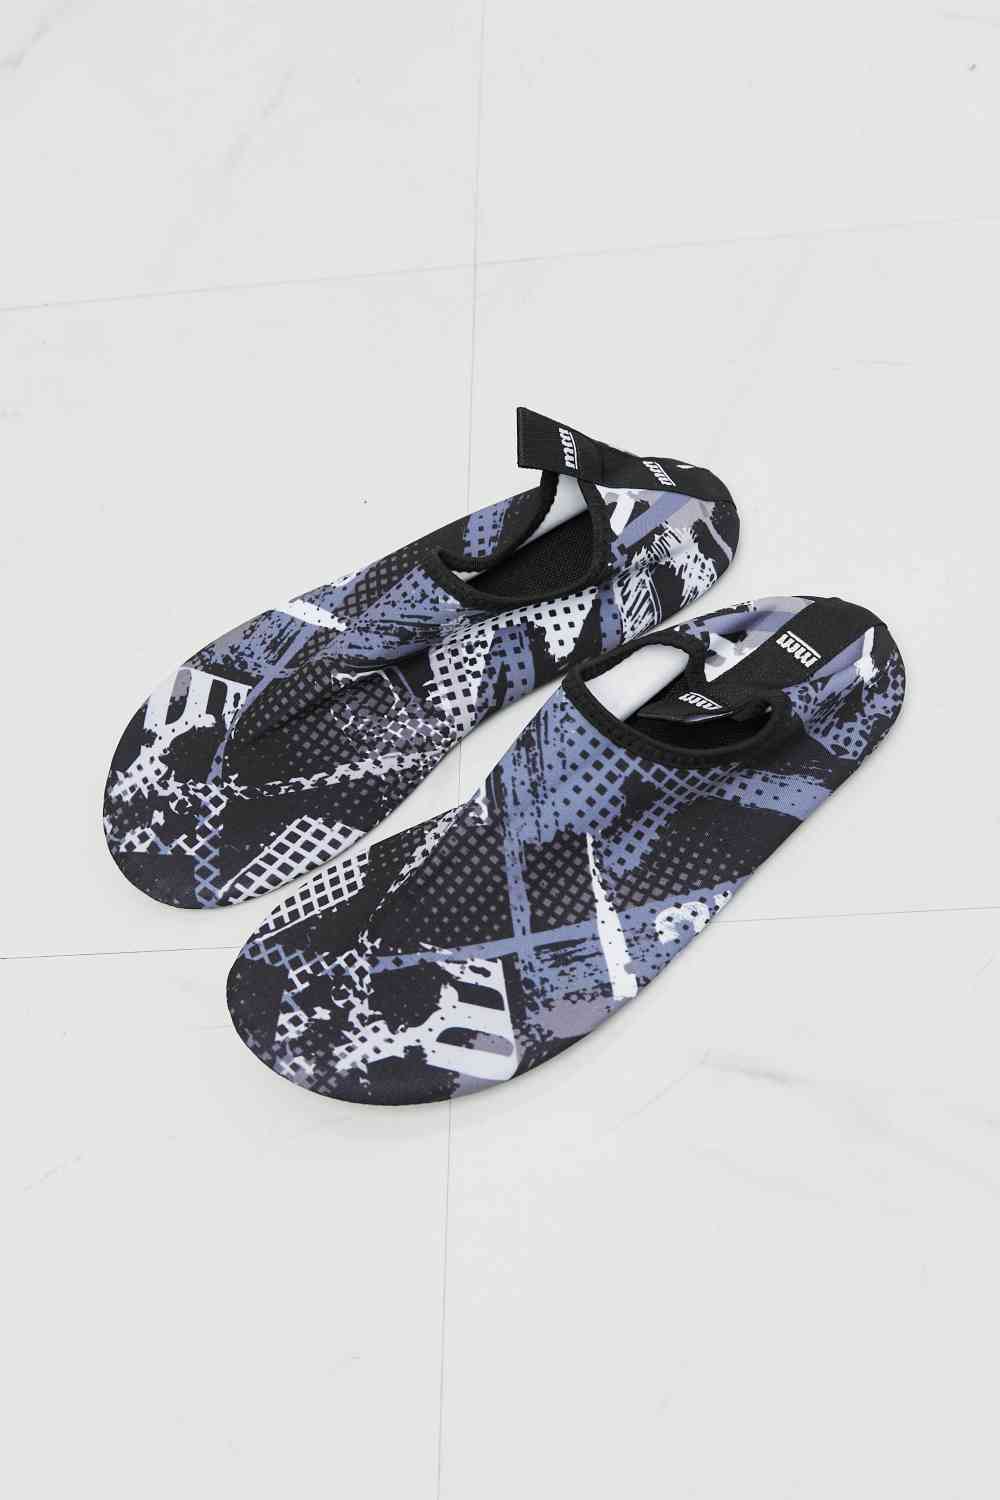 On The Shore Water Shoes in Black Pattern - Kawaii Stop - Aqua Footwear, Beach Adventures, Beach Days, Black Design, Comfortable Shoes, Durable Materials, Kayaking, Melody, Outdoor Activities, Printed Pattern, Rubber Sole, Safety First, Ship from USA, Slip-Resistant, Swimming, US Sizing, Water Protection, Water Shoes, Wet Surfaces